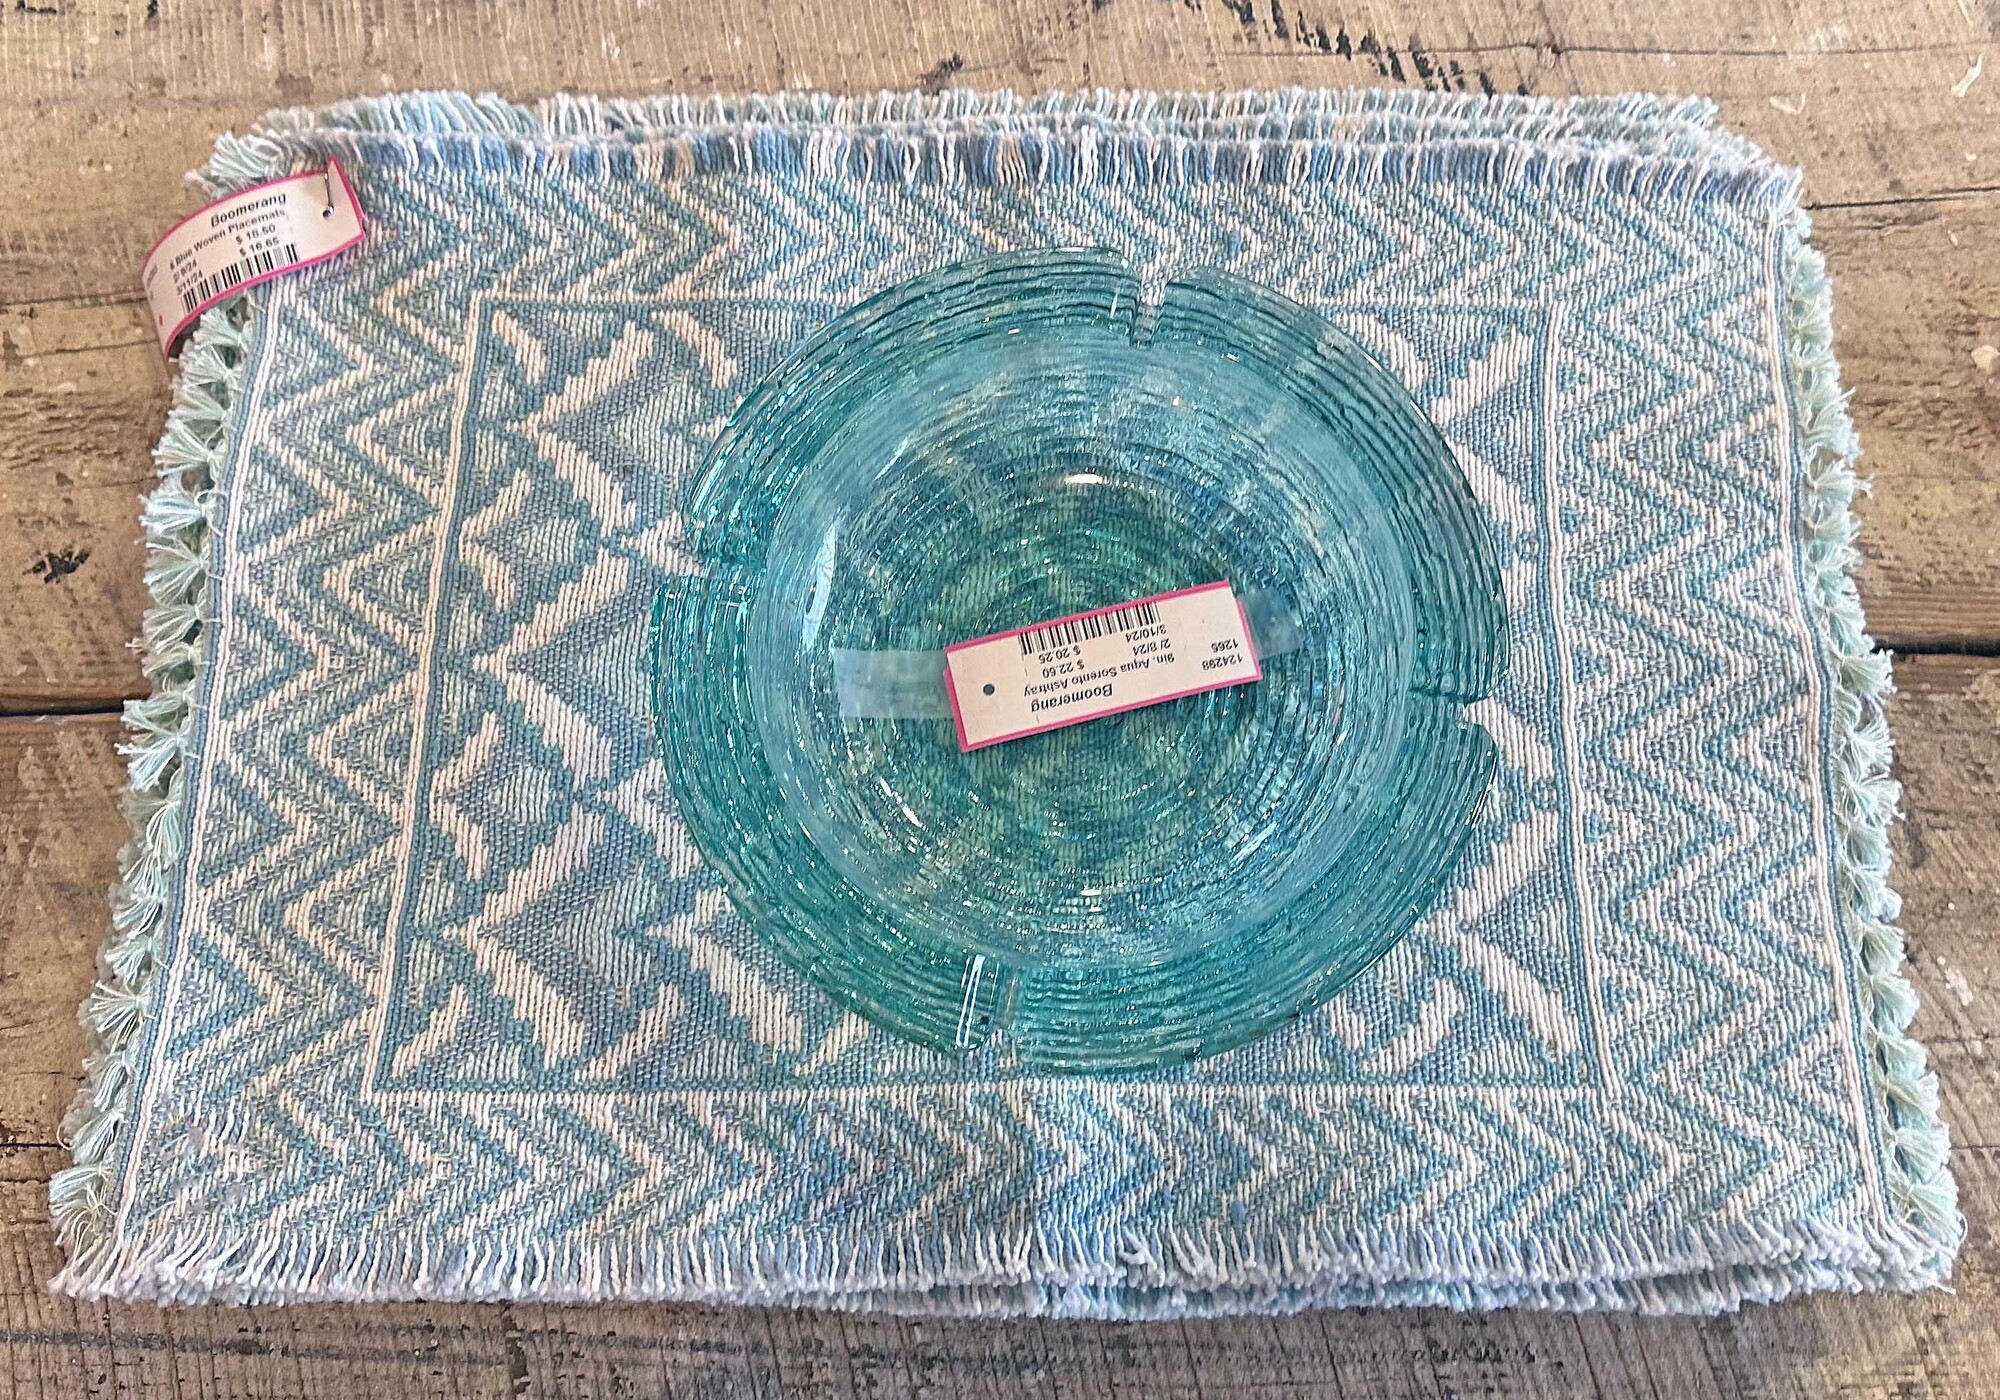 6 Blue Woven Placemats

Handwoven
Made in India
Unused